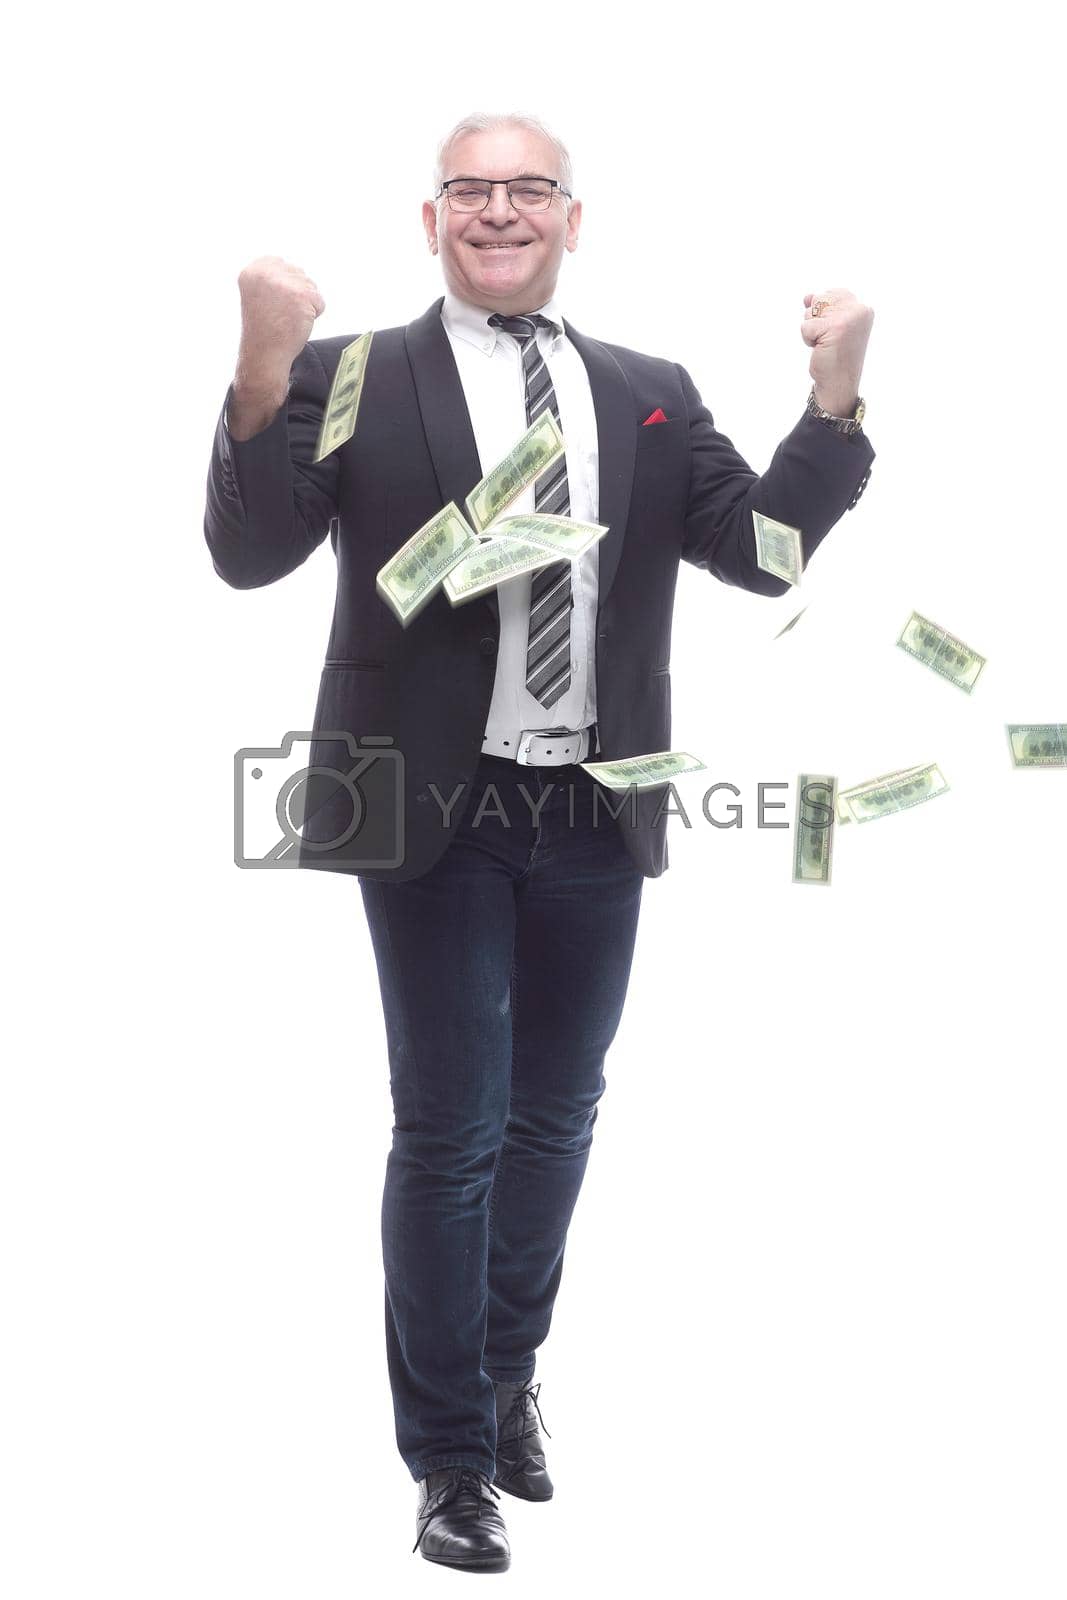 Royalty free image of in full growth. happy businessman showing a lot of cash bills by asdf